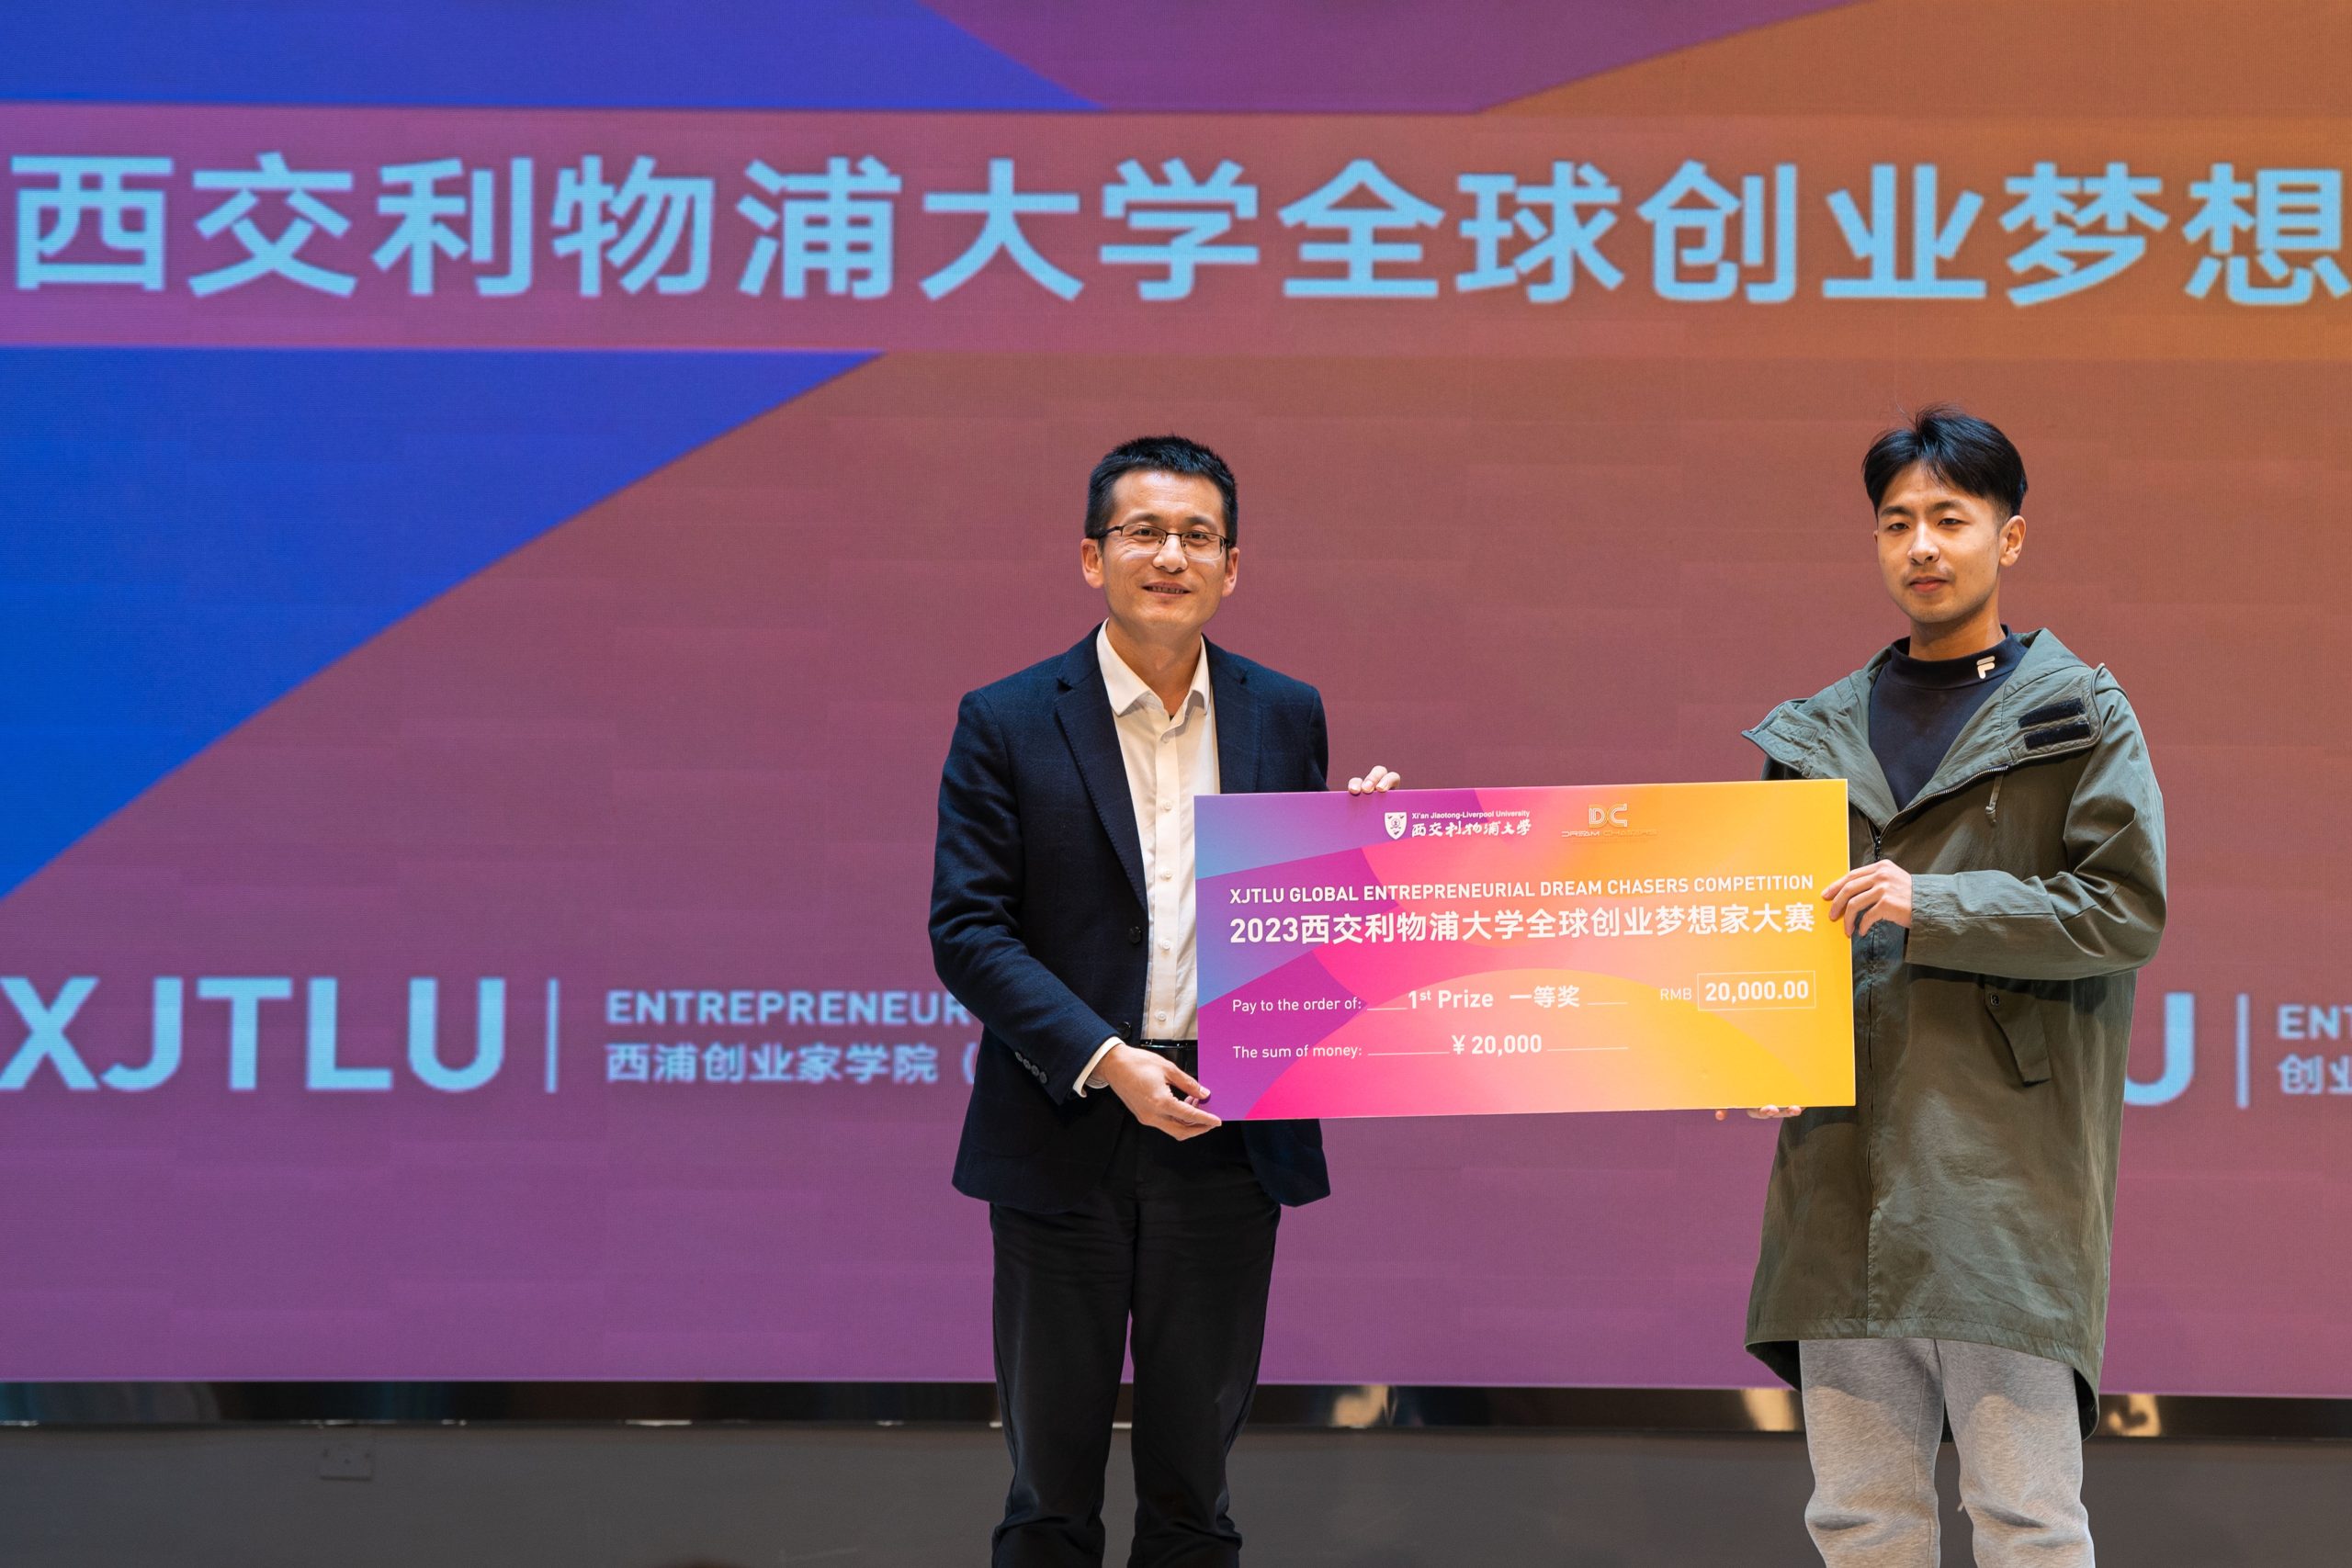 Students chase entrepreneurial dreams in XJTLU contest